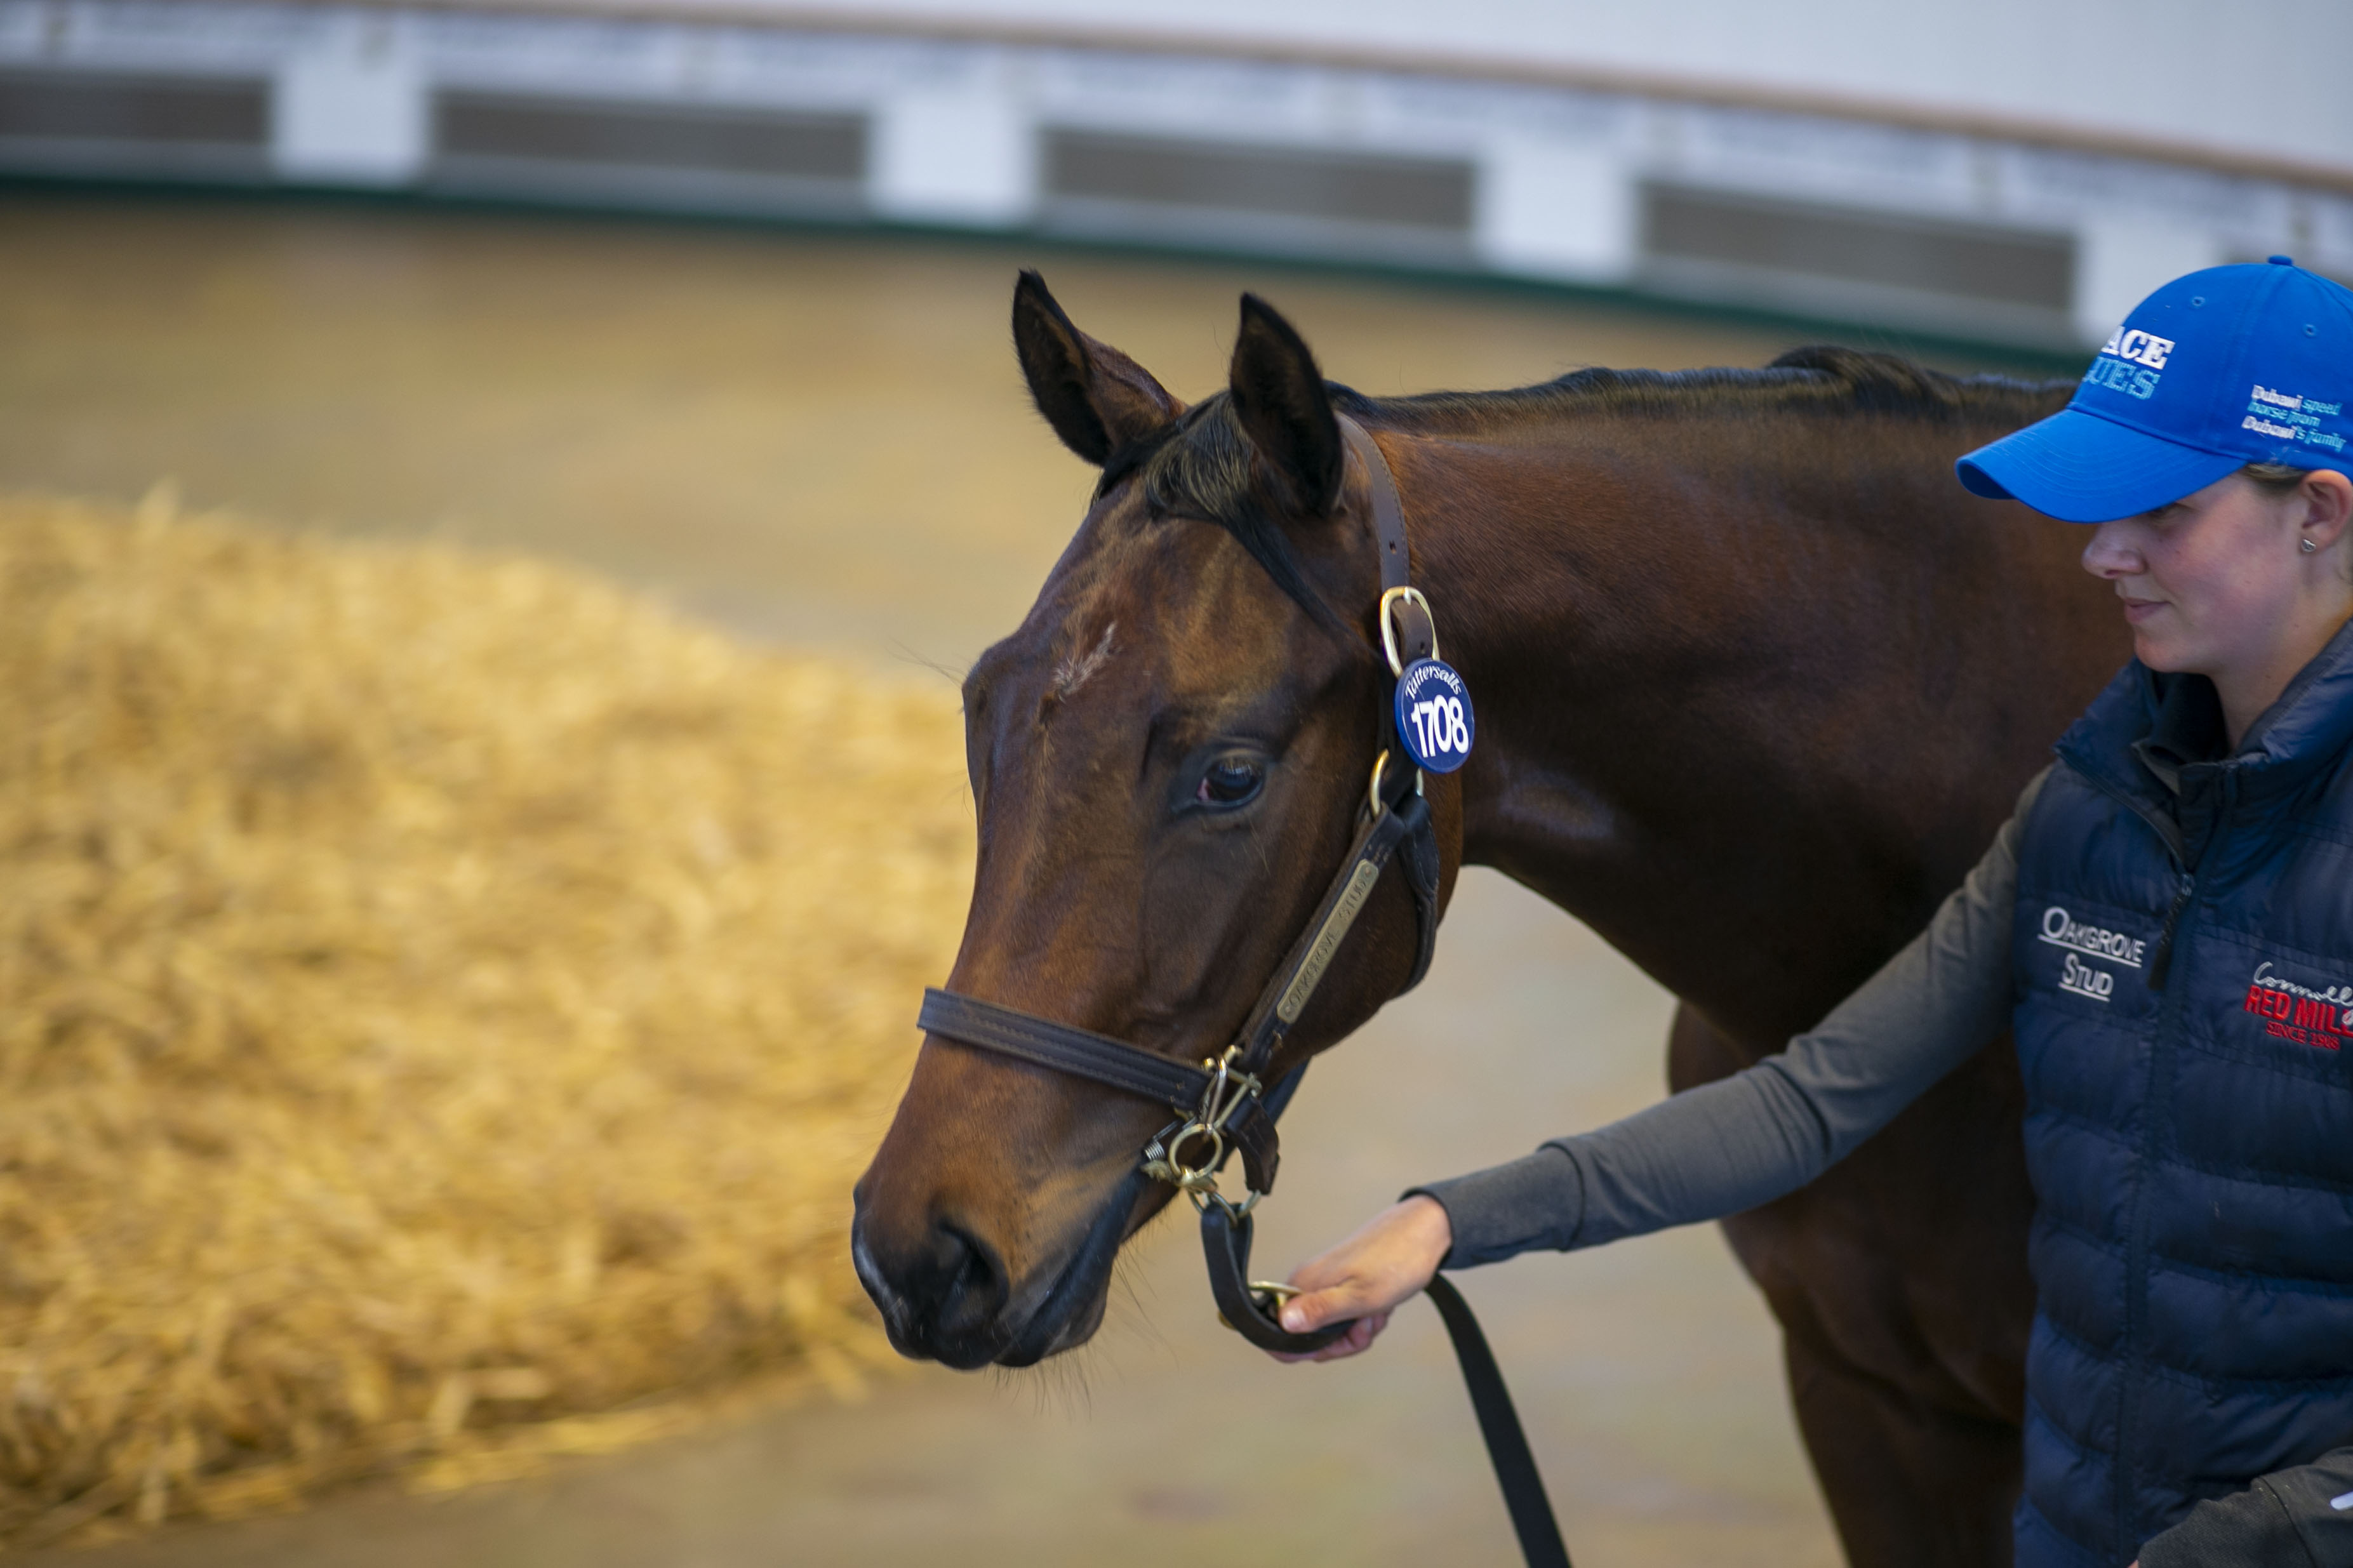 Lot 1708 Ten Sovereigns - Lady Grace filly. Picture: Tattersalls.